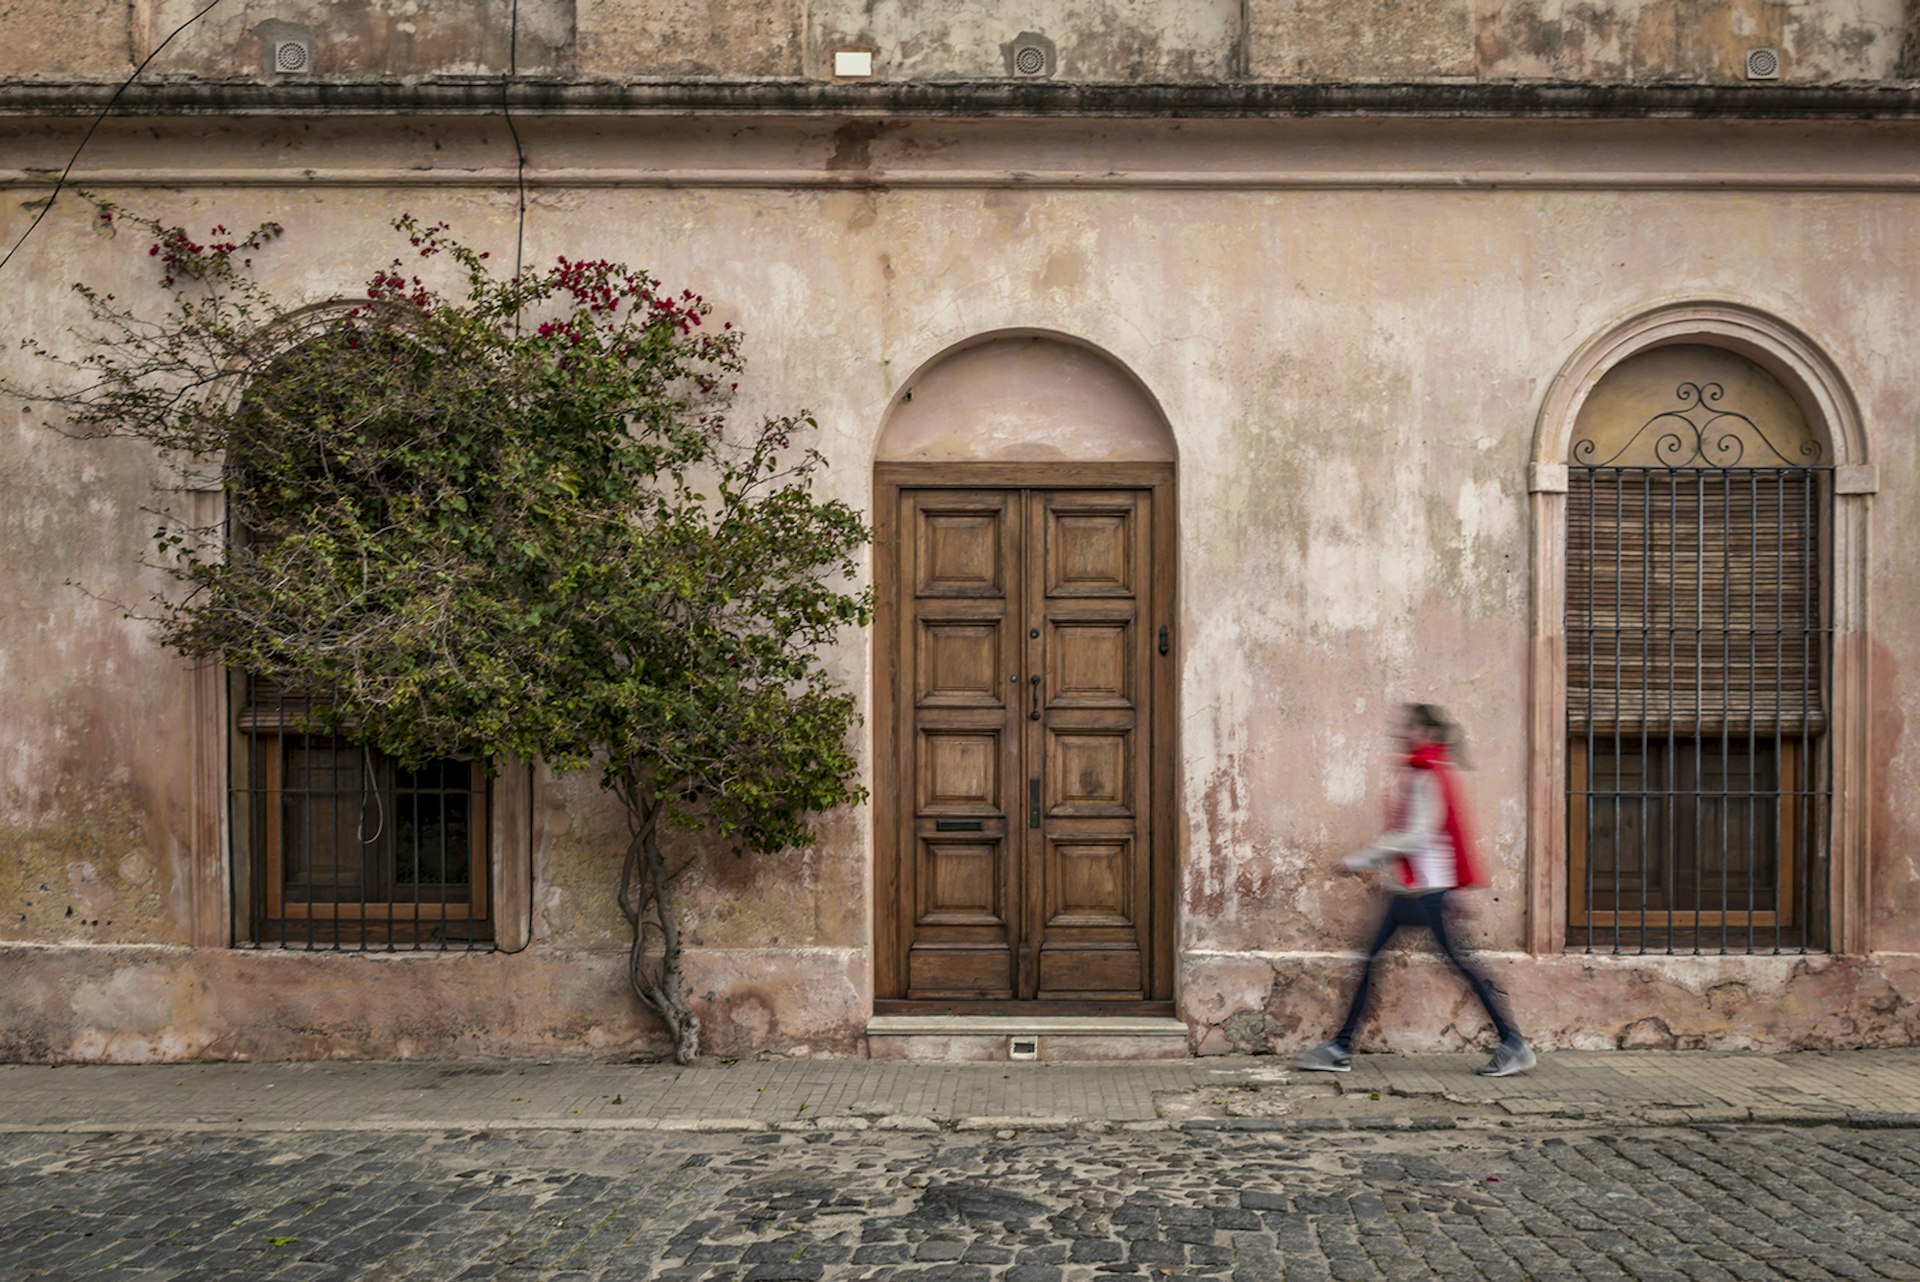 A long exposure of a woman wearing a red scarf walking in front of a worn, pink building with a large wooden door and a ficus tree growing up the wall